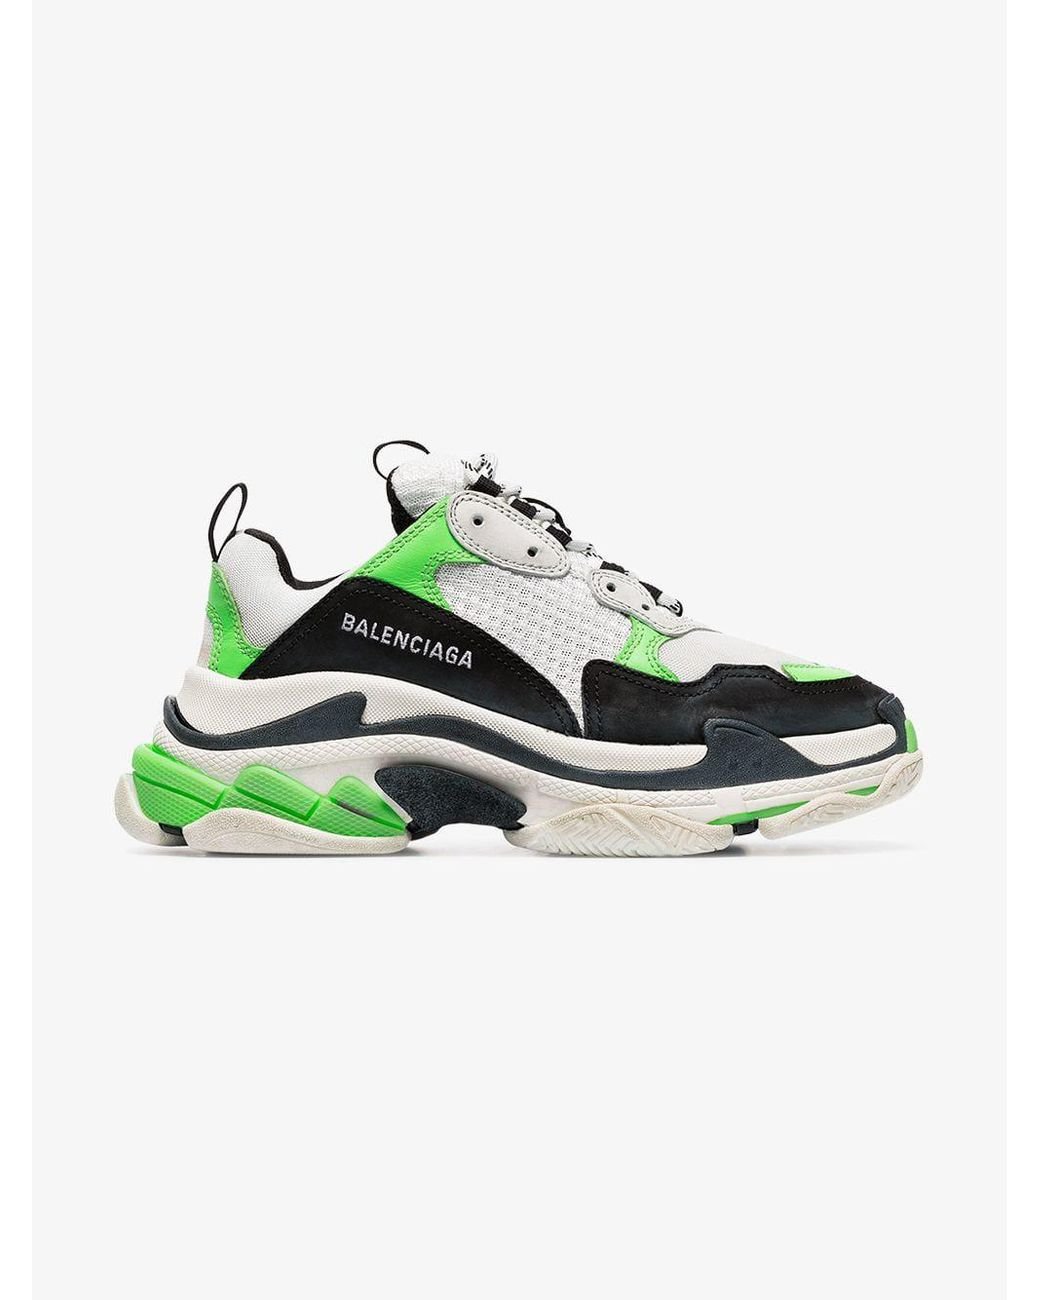 Balenciaga Synthetic Neon Green And Black Triple S Sneakers in White | Lyst